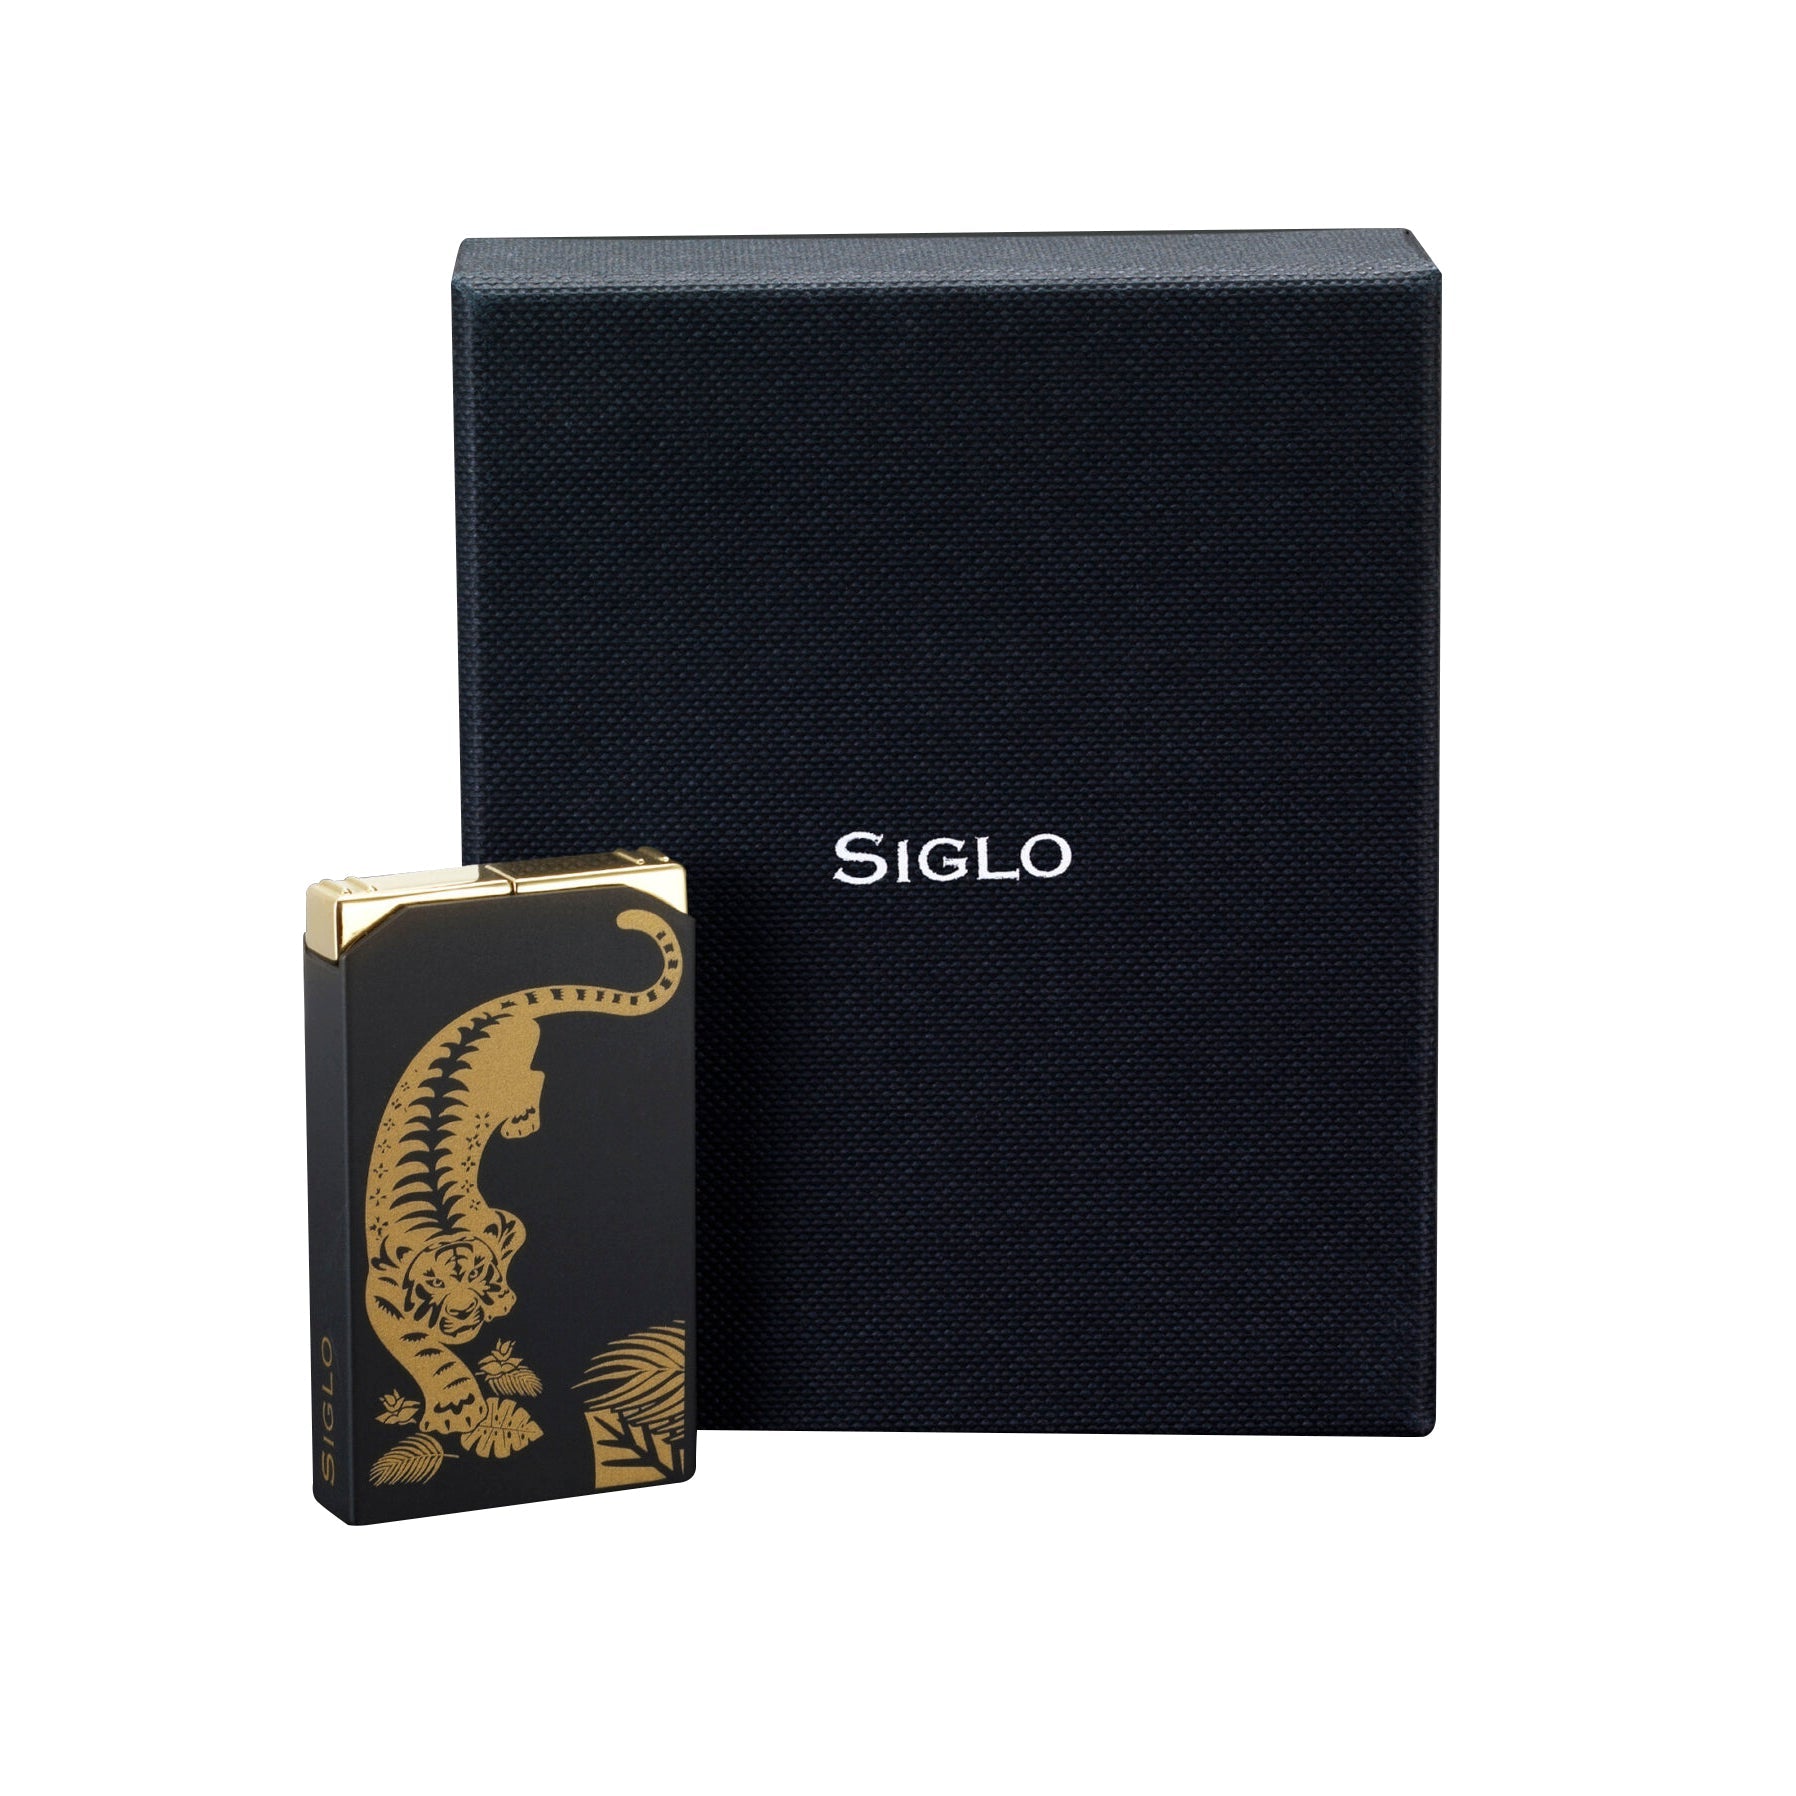 SIGLO ACCESSORIES Siglo Tiger Lighter - Shiny Black